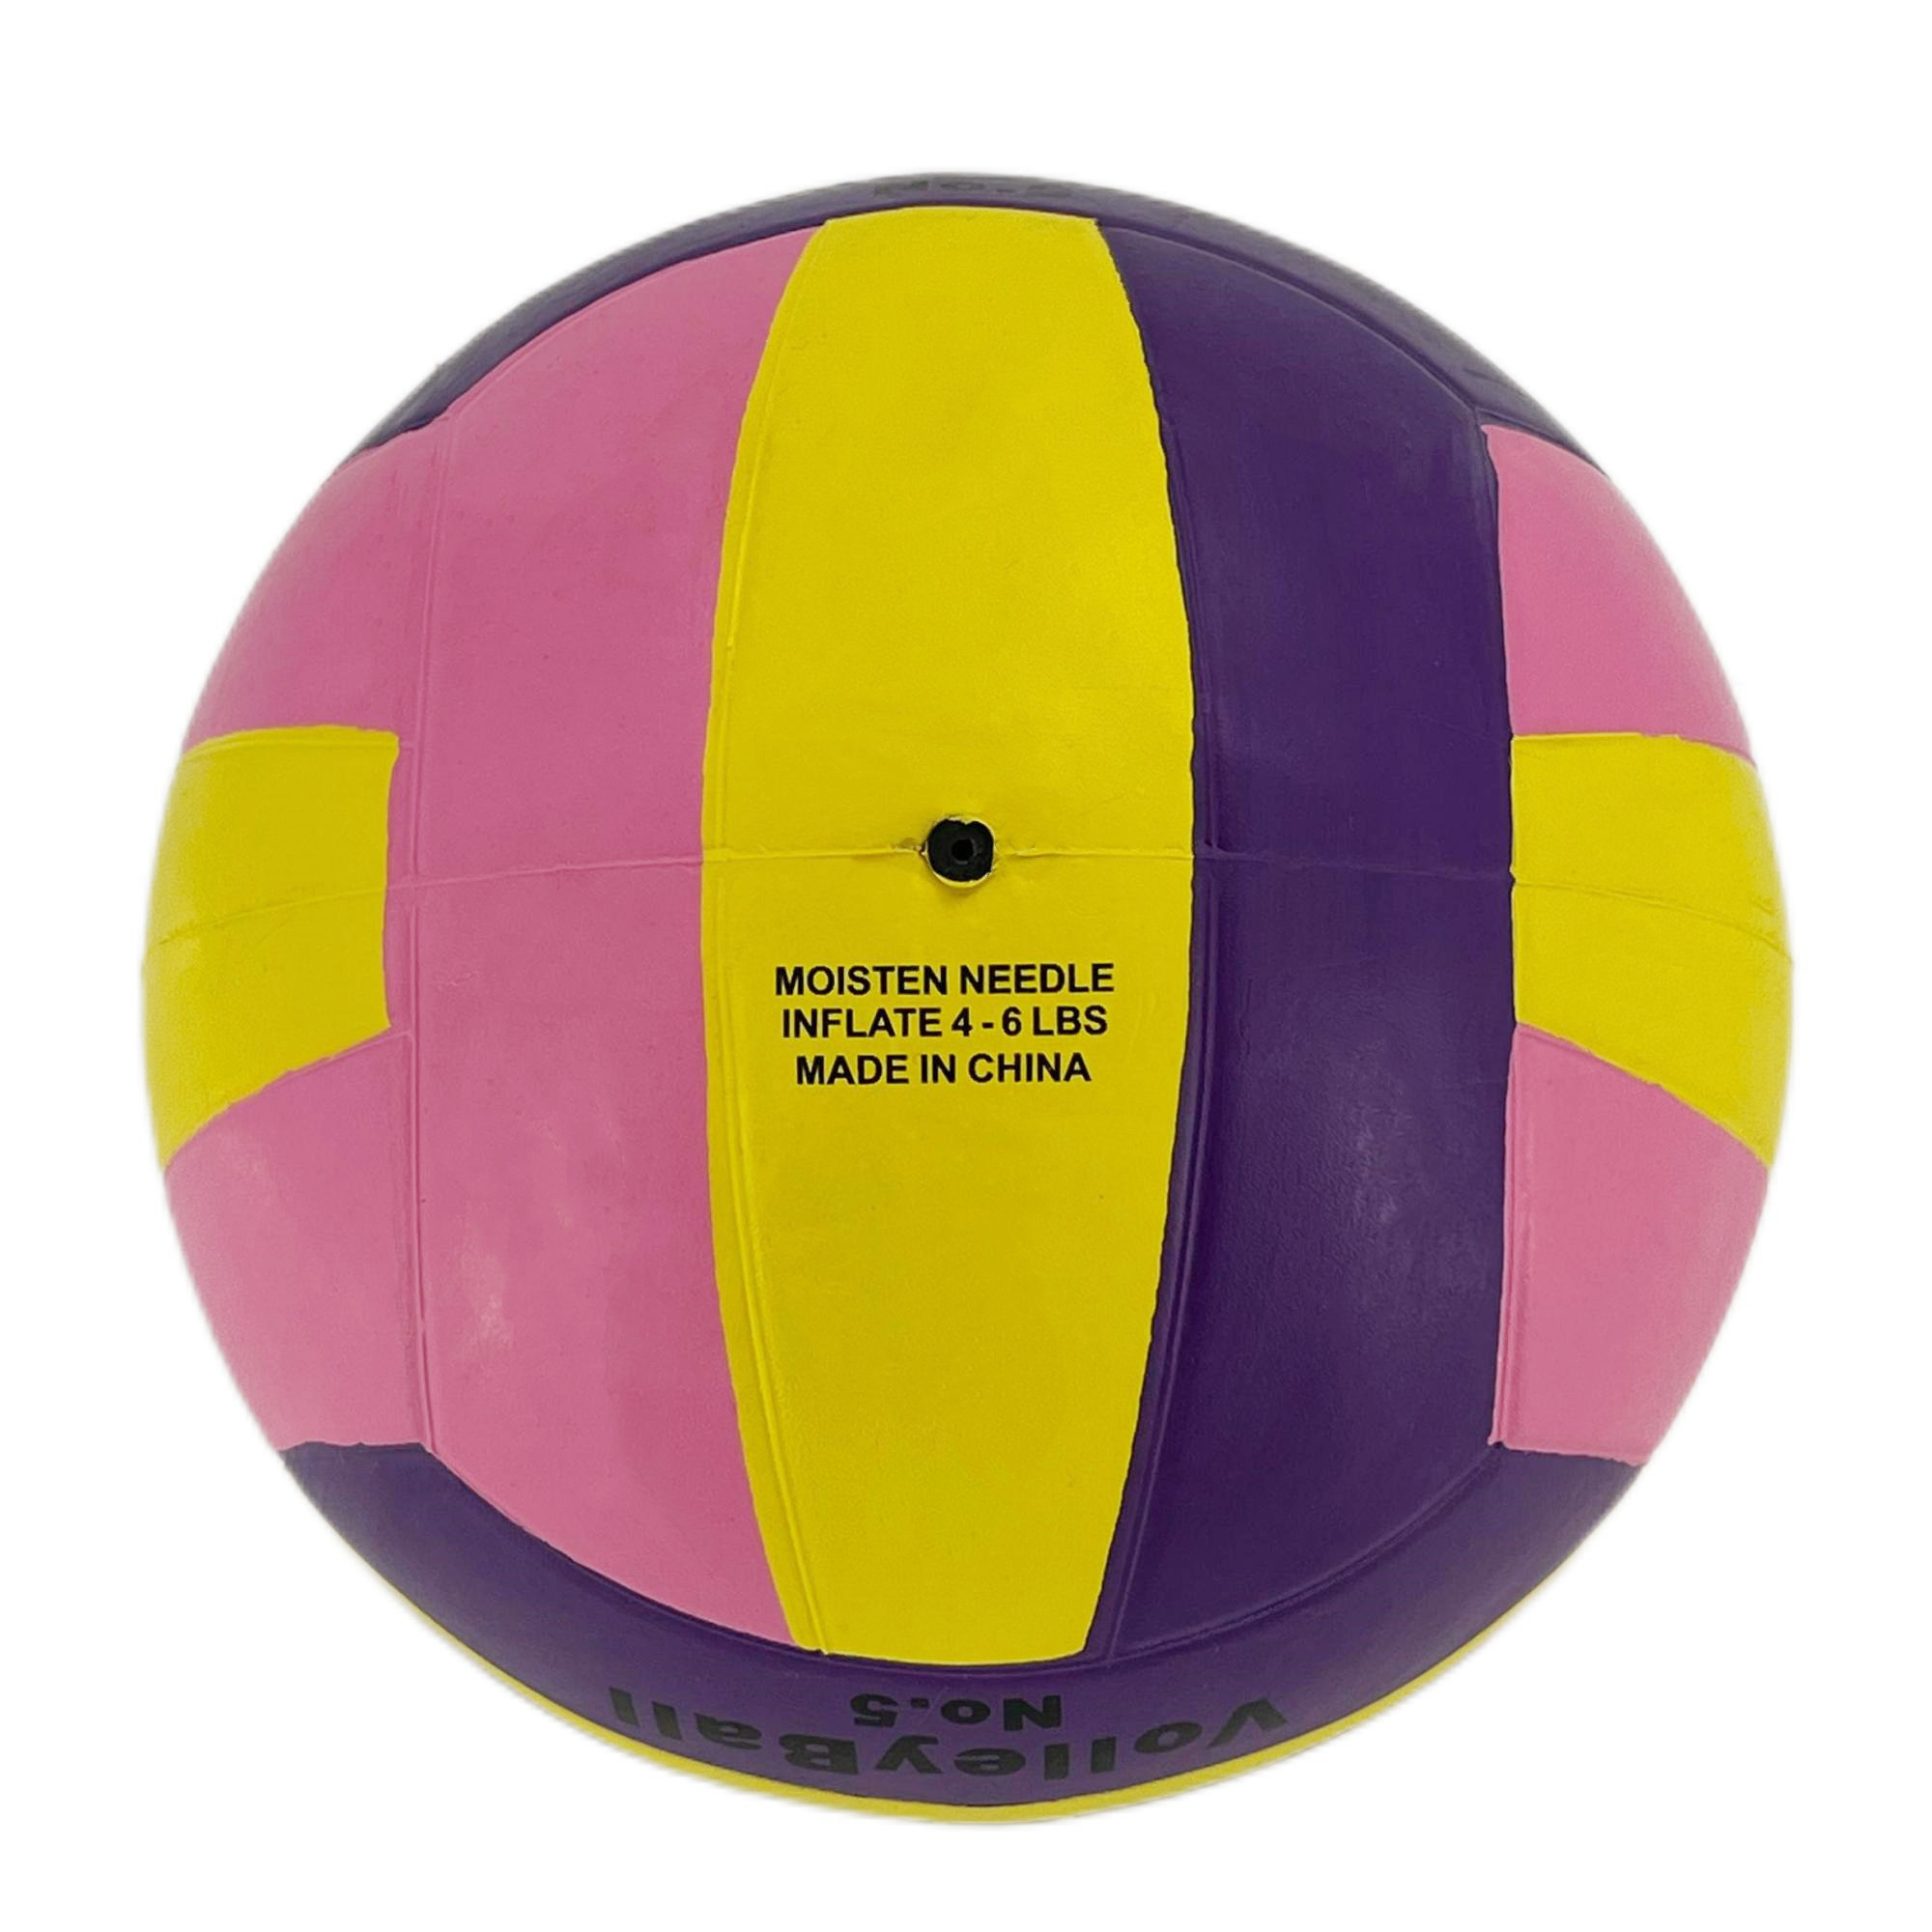 Rubber volleyball - ueeshop